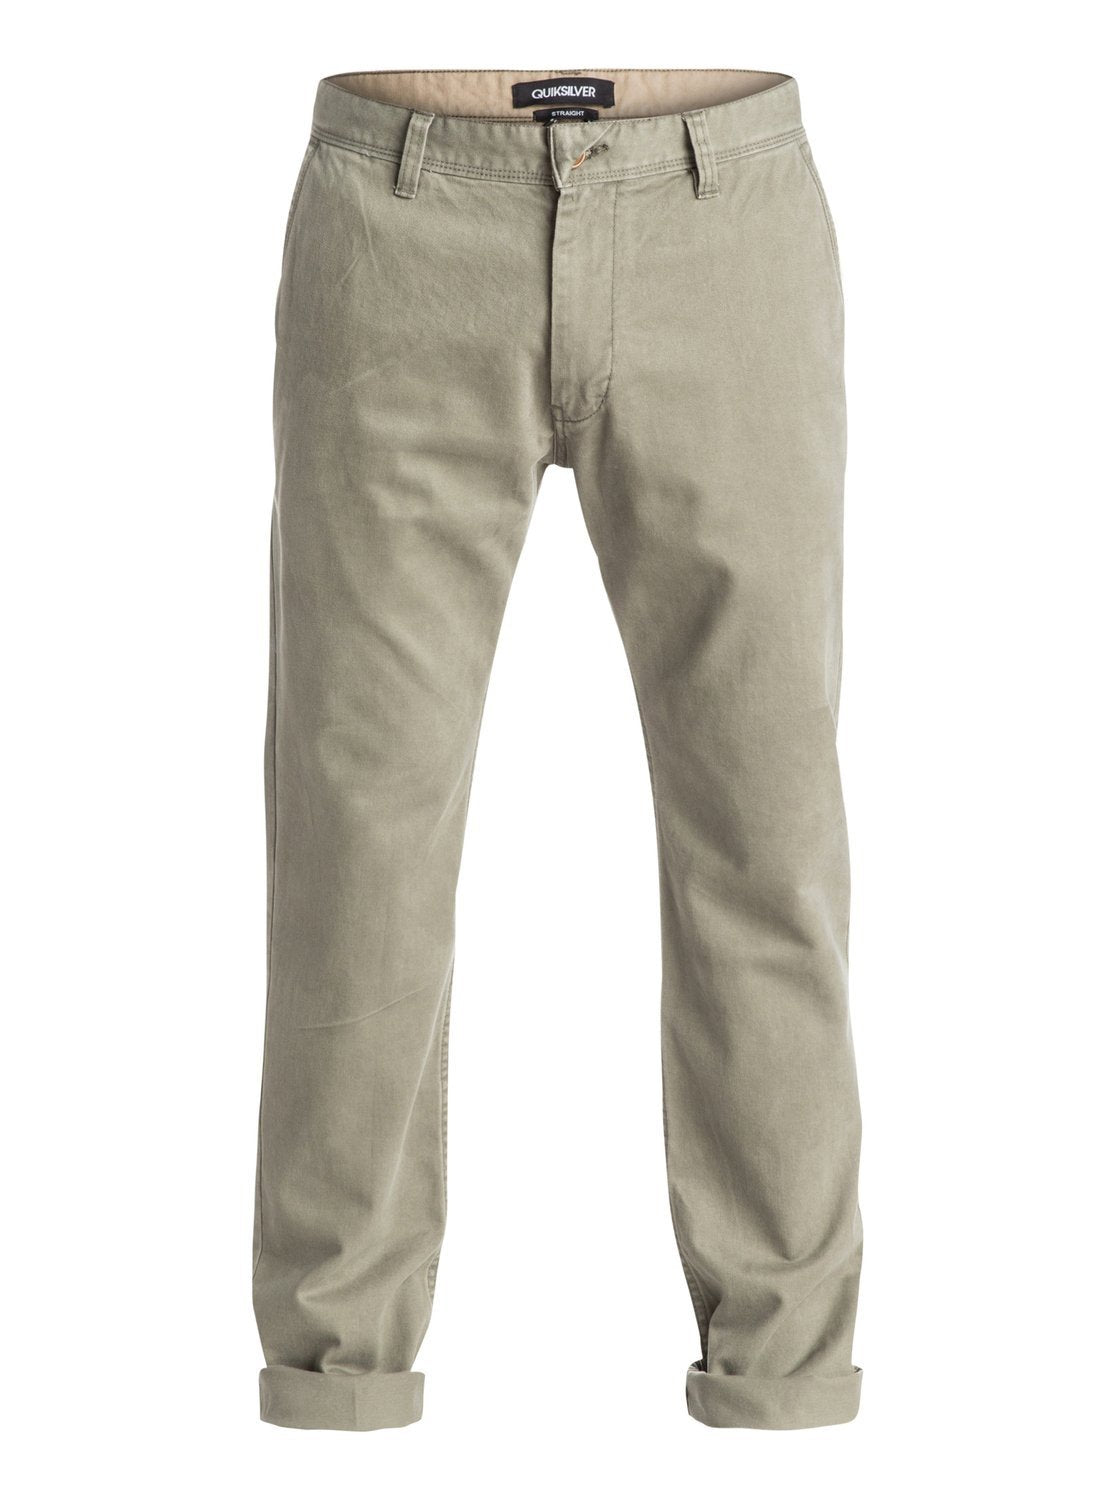 Quiksilver Dusty-Olive Everyday Chino Pant